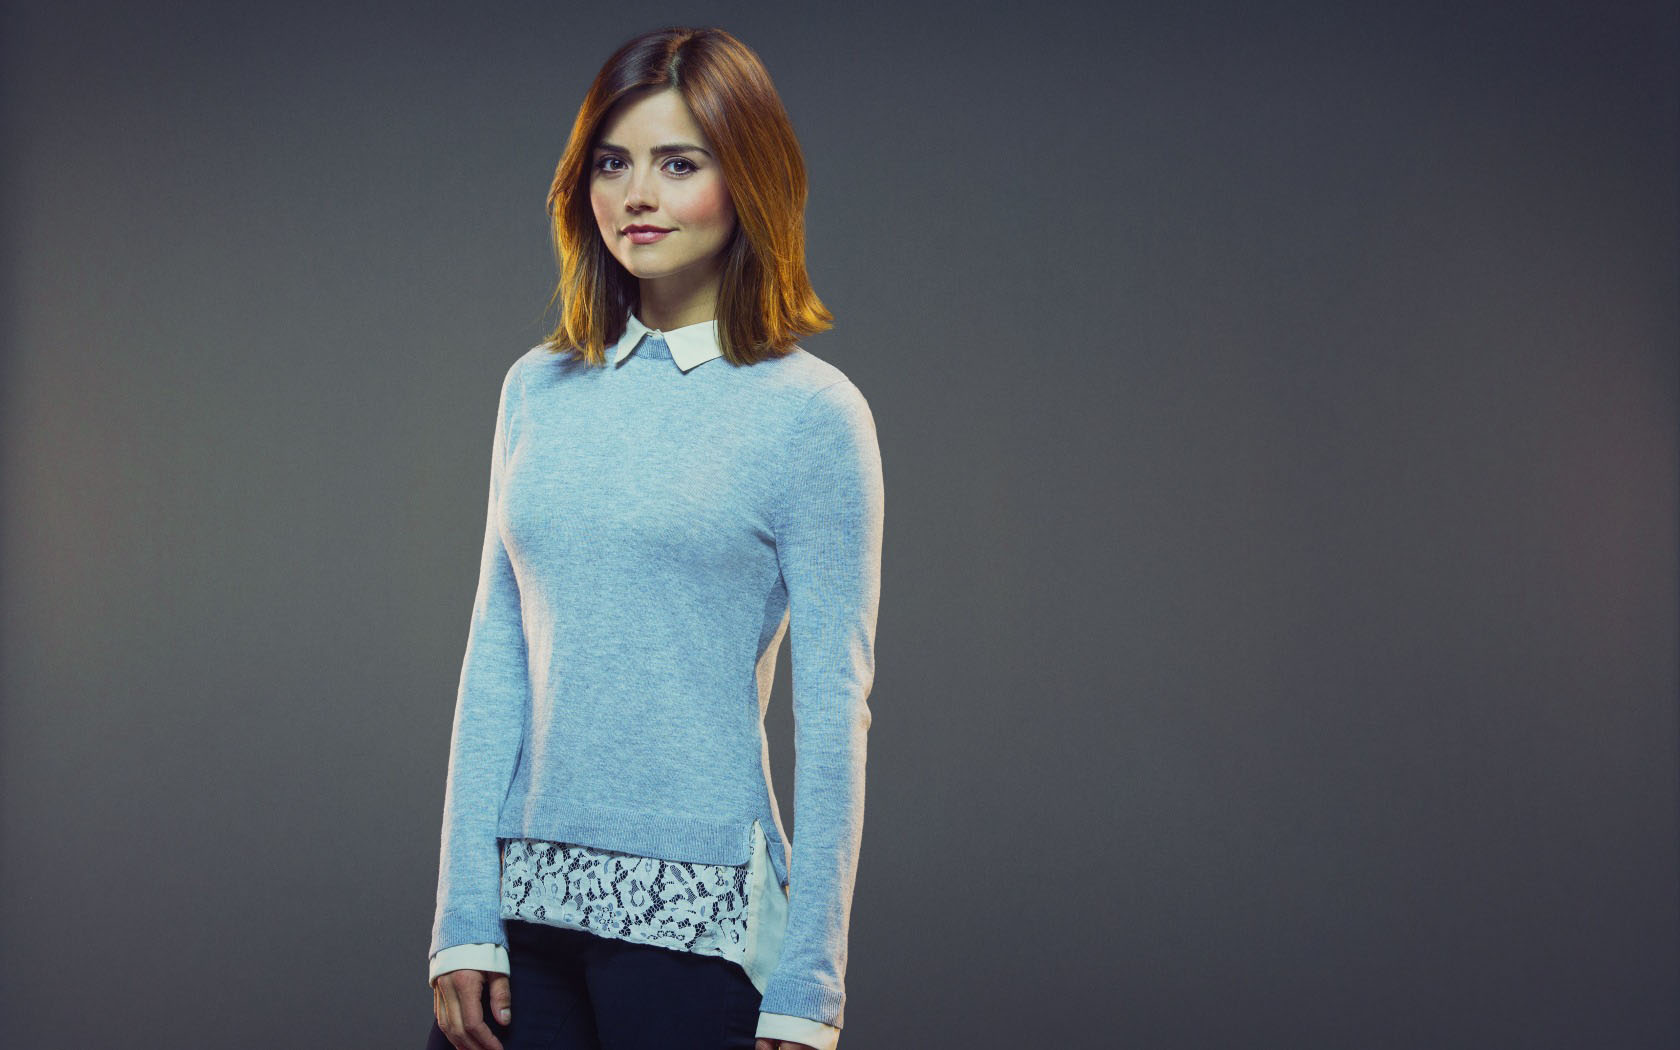 Jenna-Louise Coleman Wallpapers